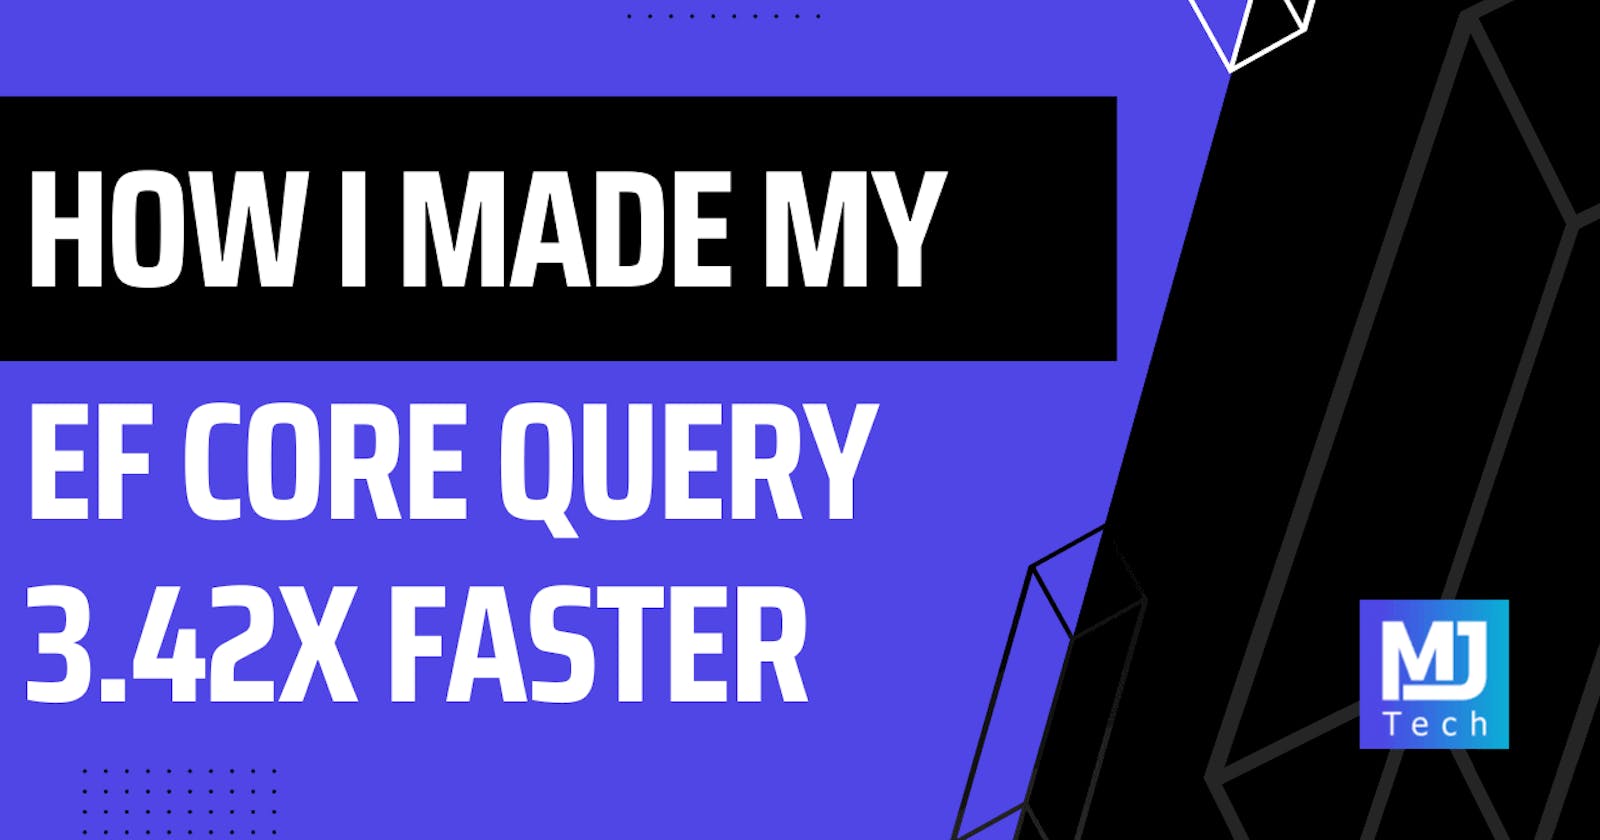 How I Made My EF Core Query 3.42x Faster With Batching